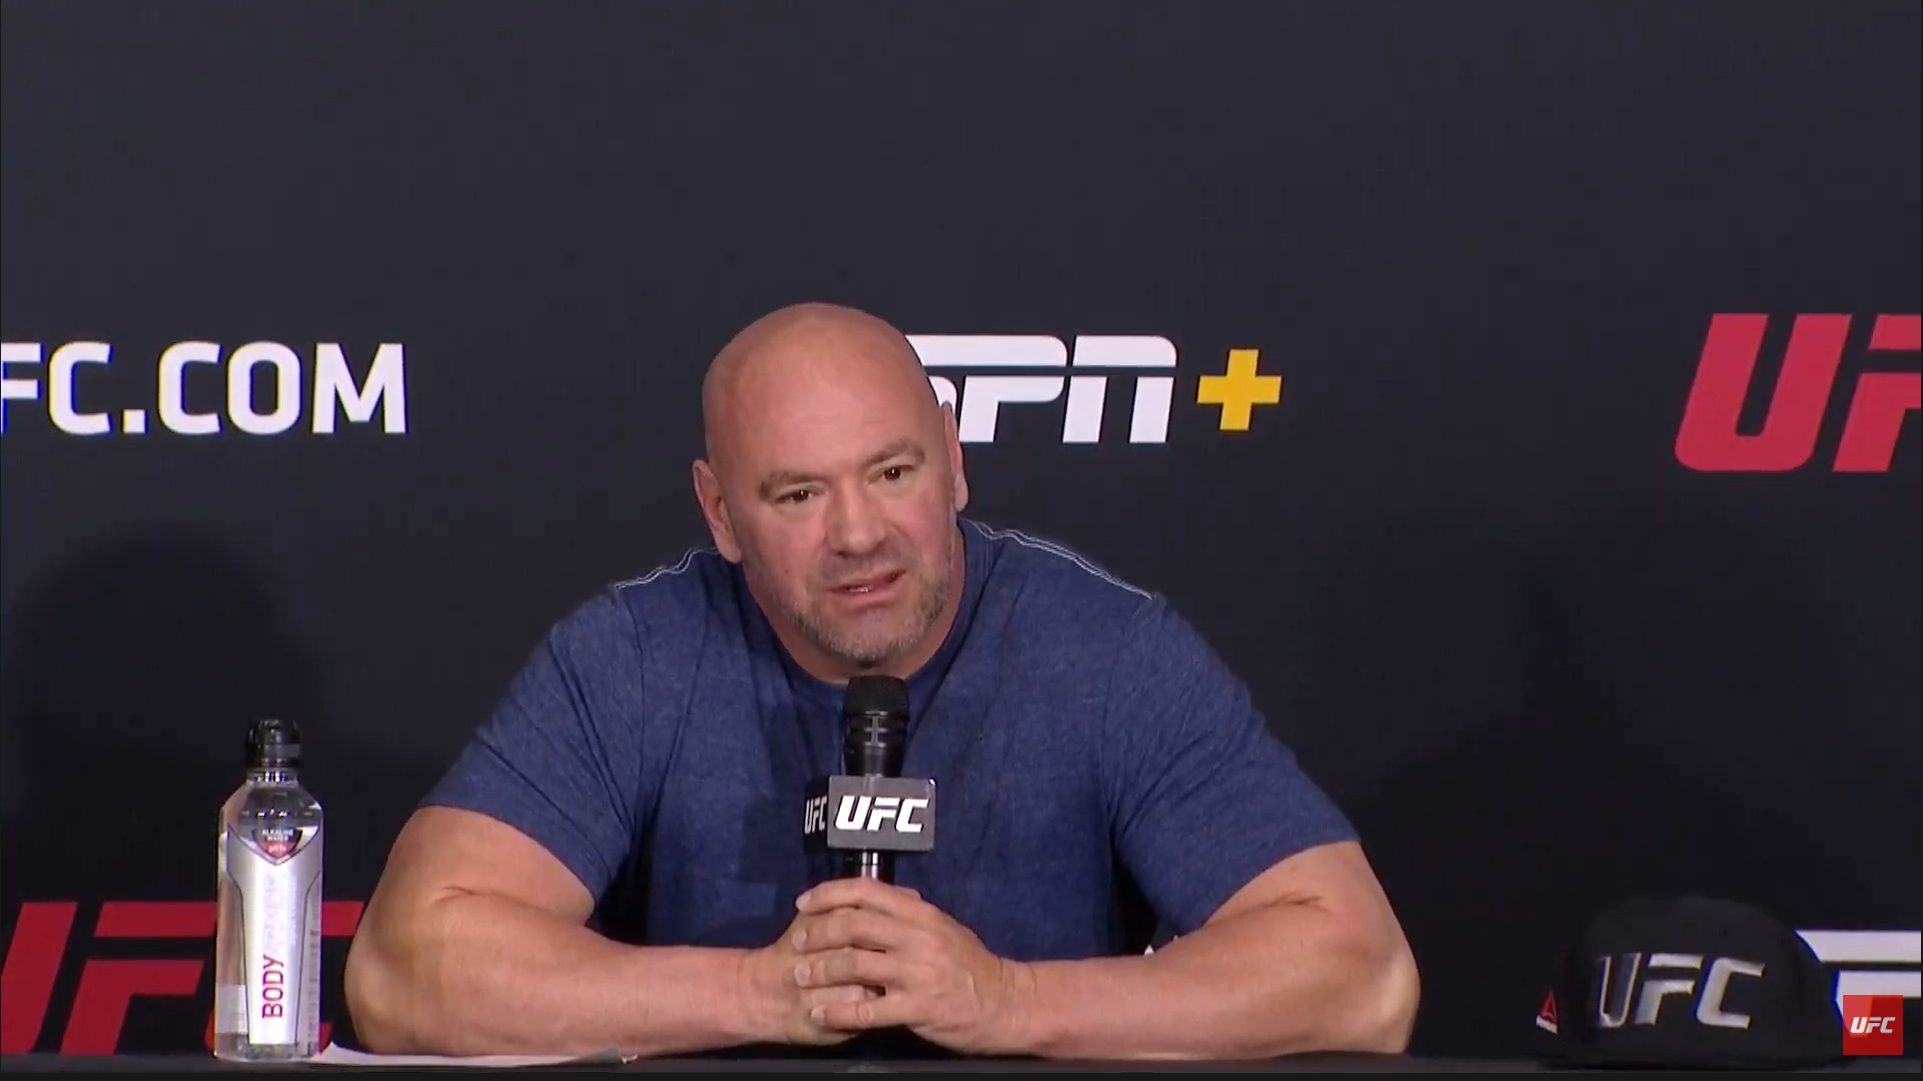 Watch UFC on ESPN 9 Post-Fight Press Conference LIVE Here